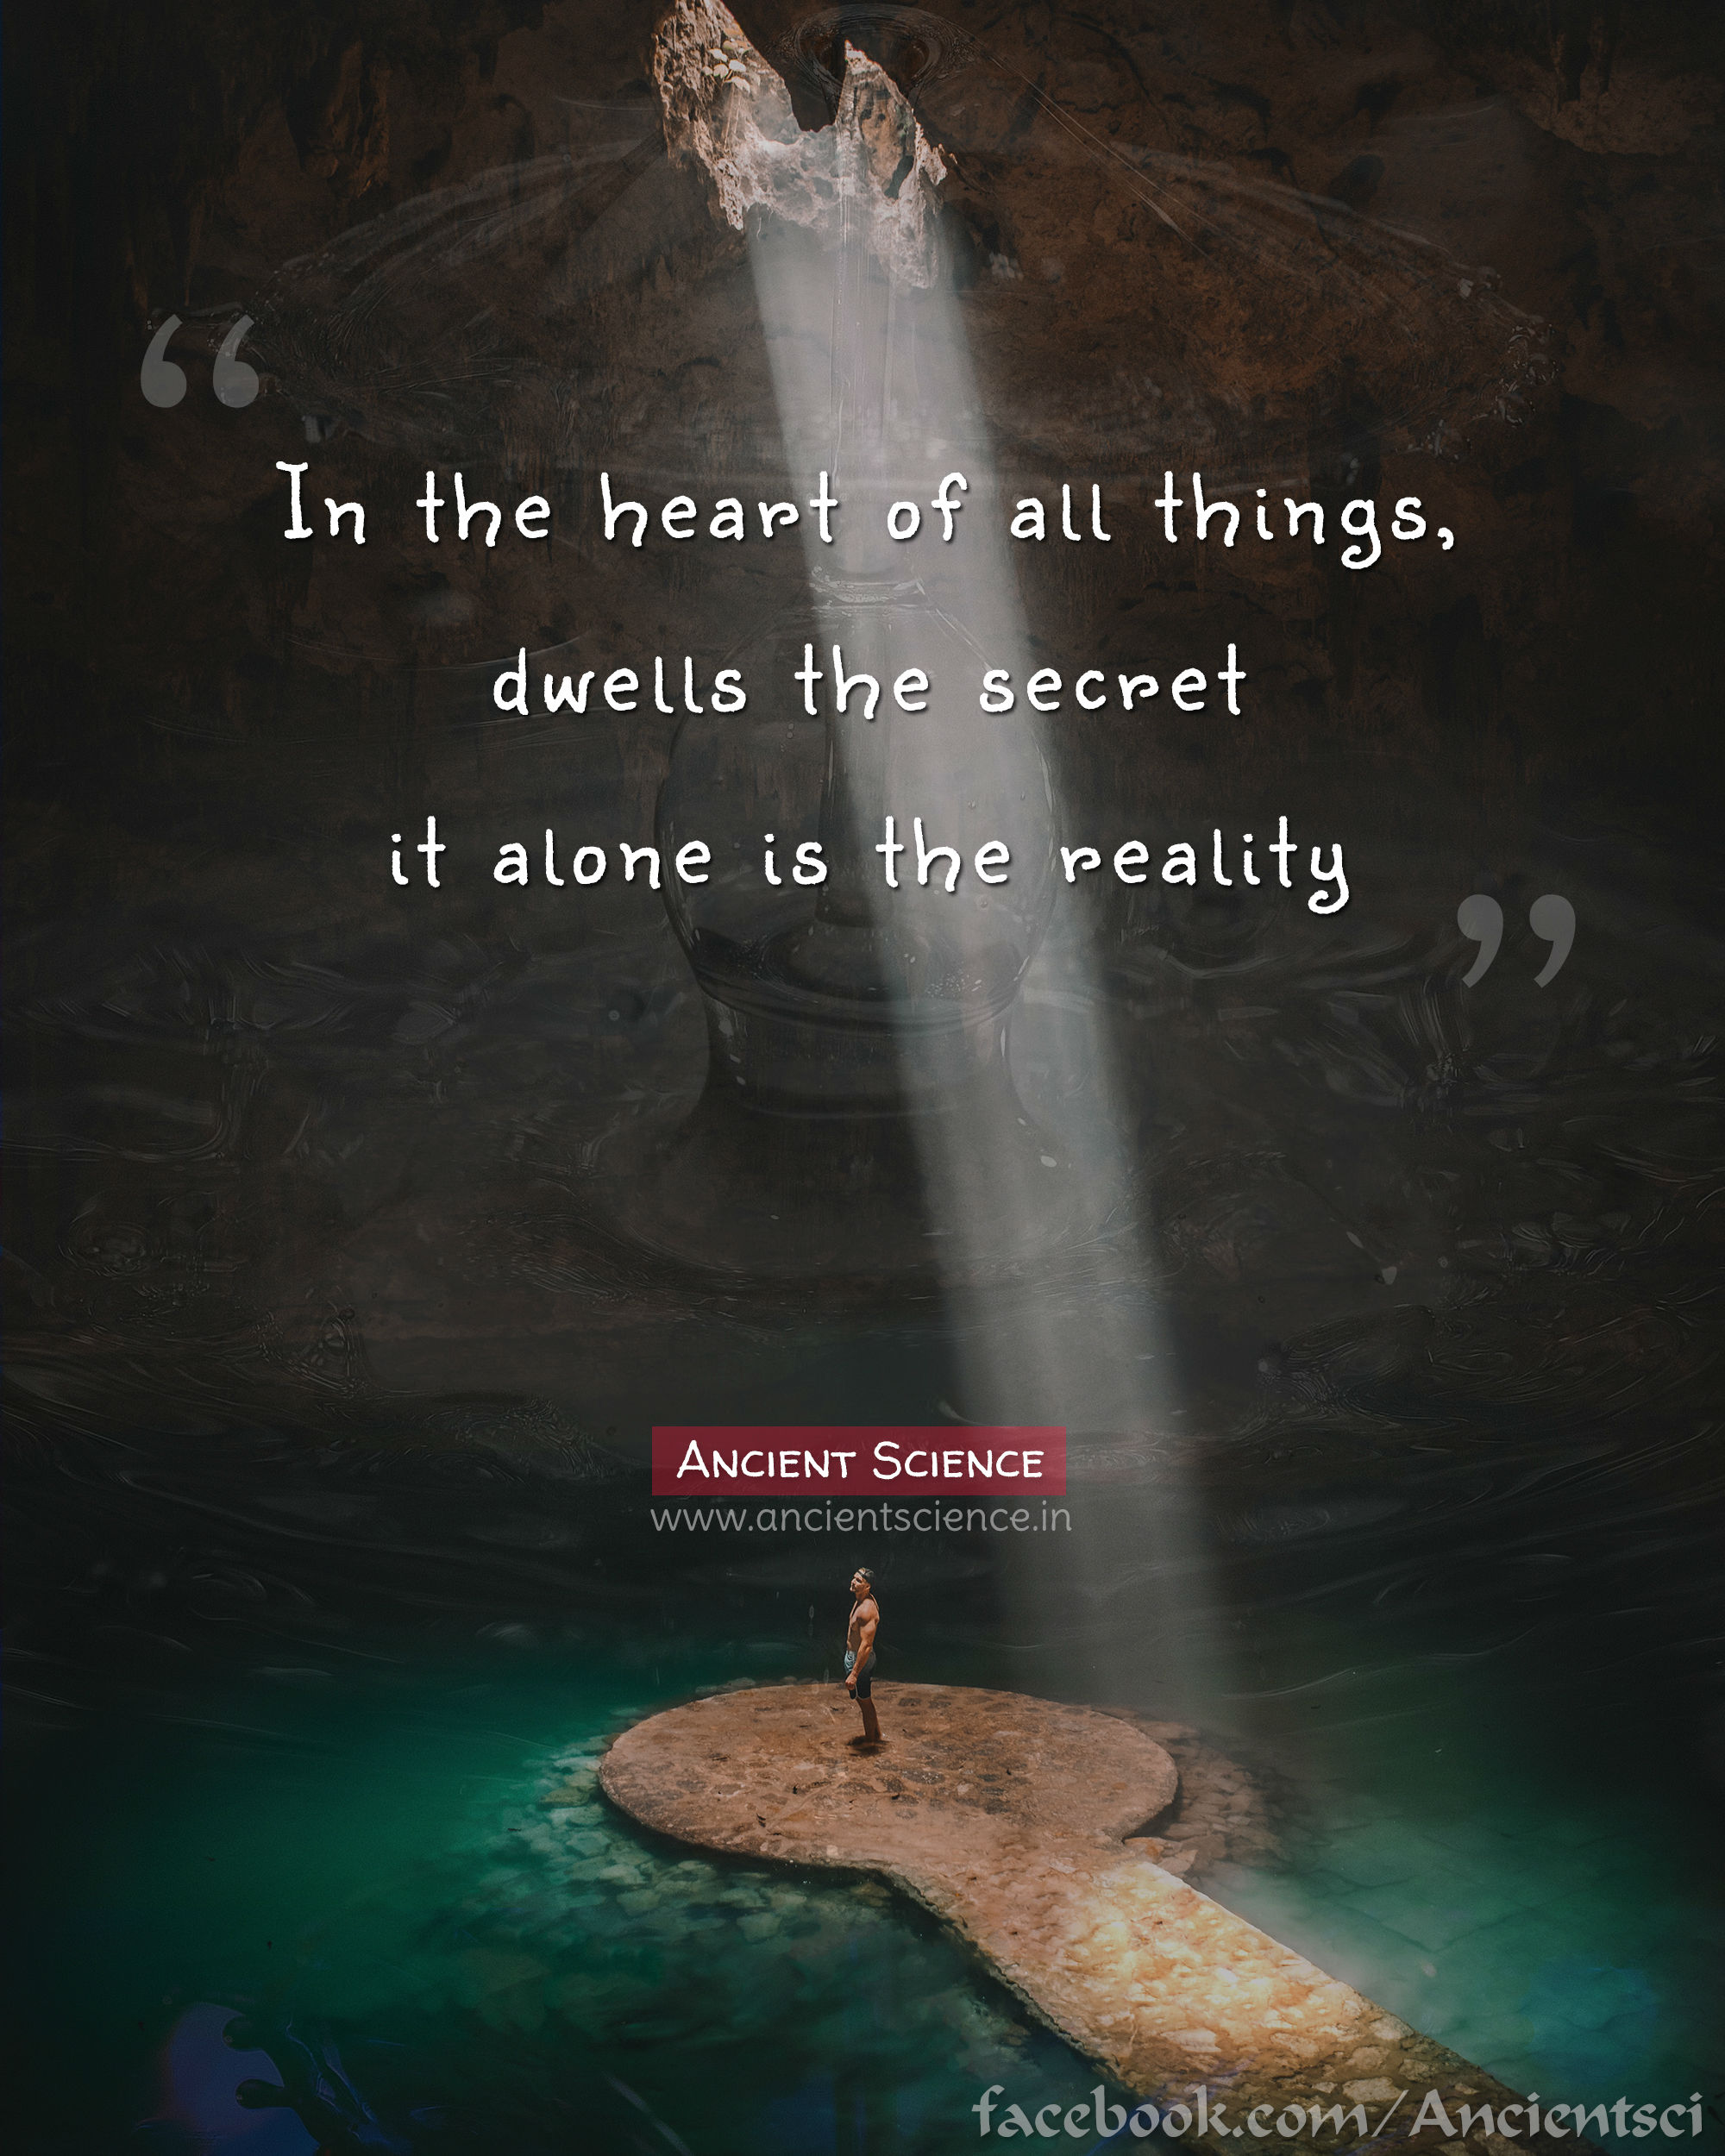 In the heart of all things, dwells the secret, it alone is the reality.